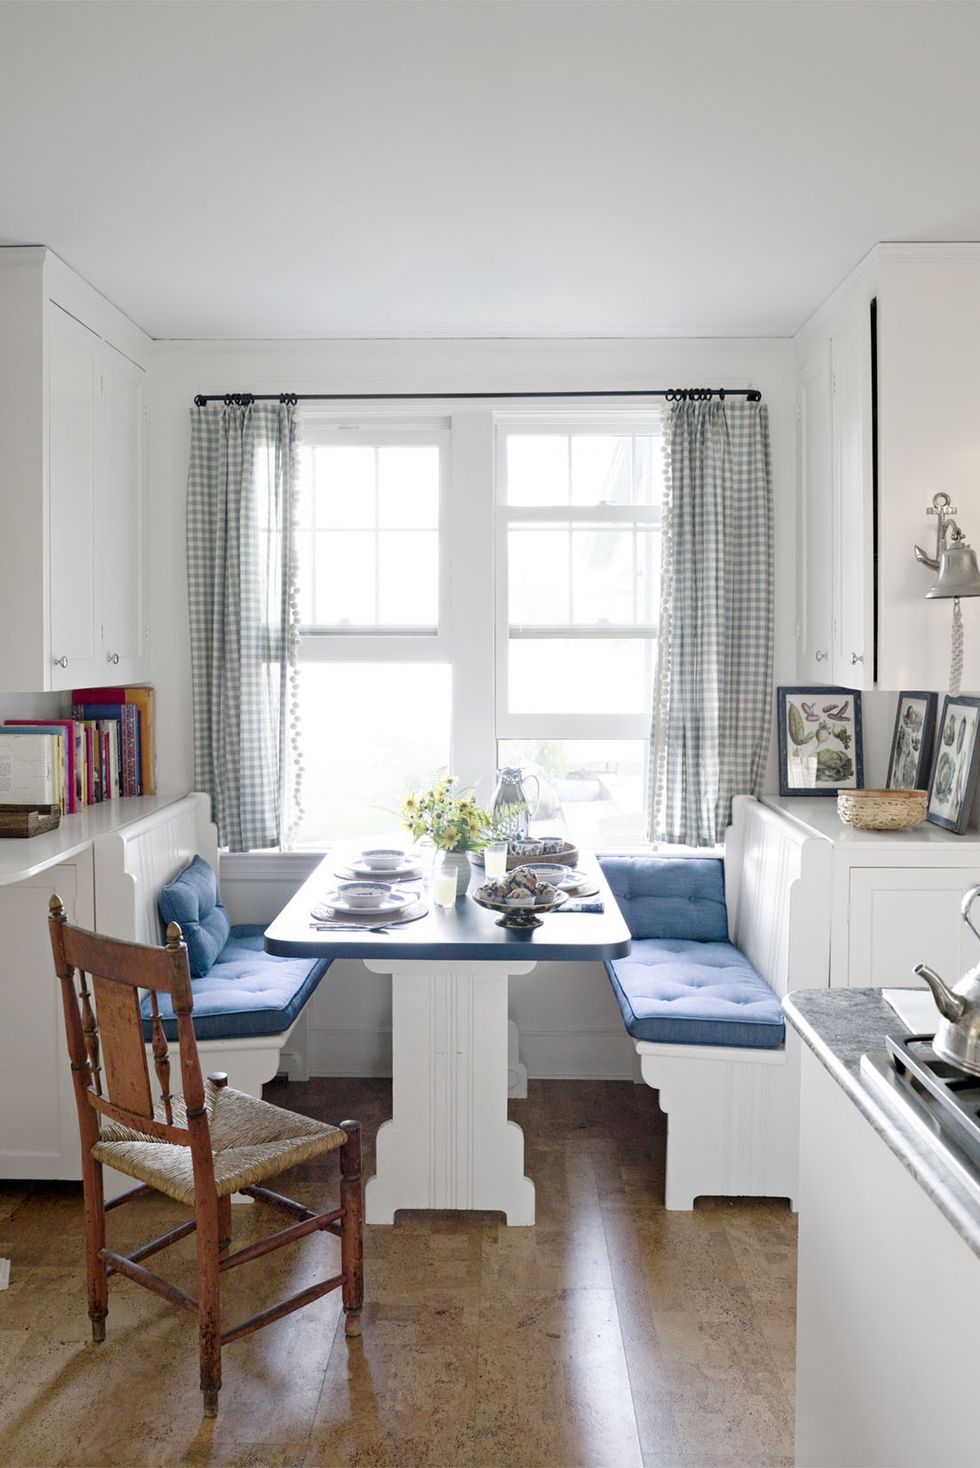 Extend your kitchen space with a cozy, multipurpose breakfast nook